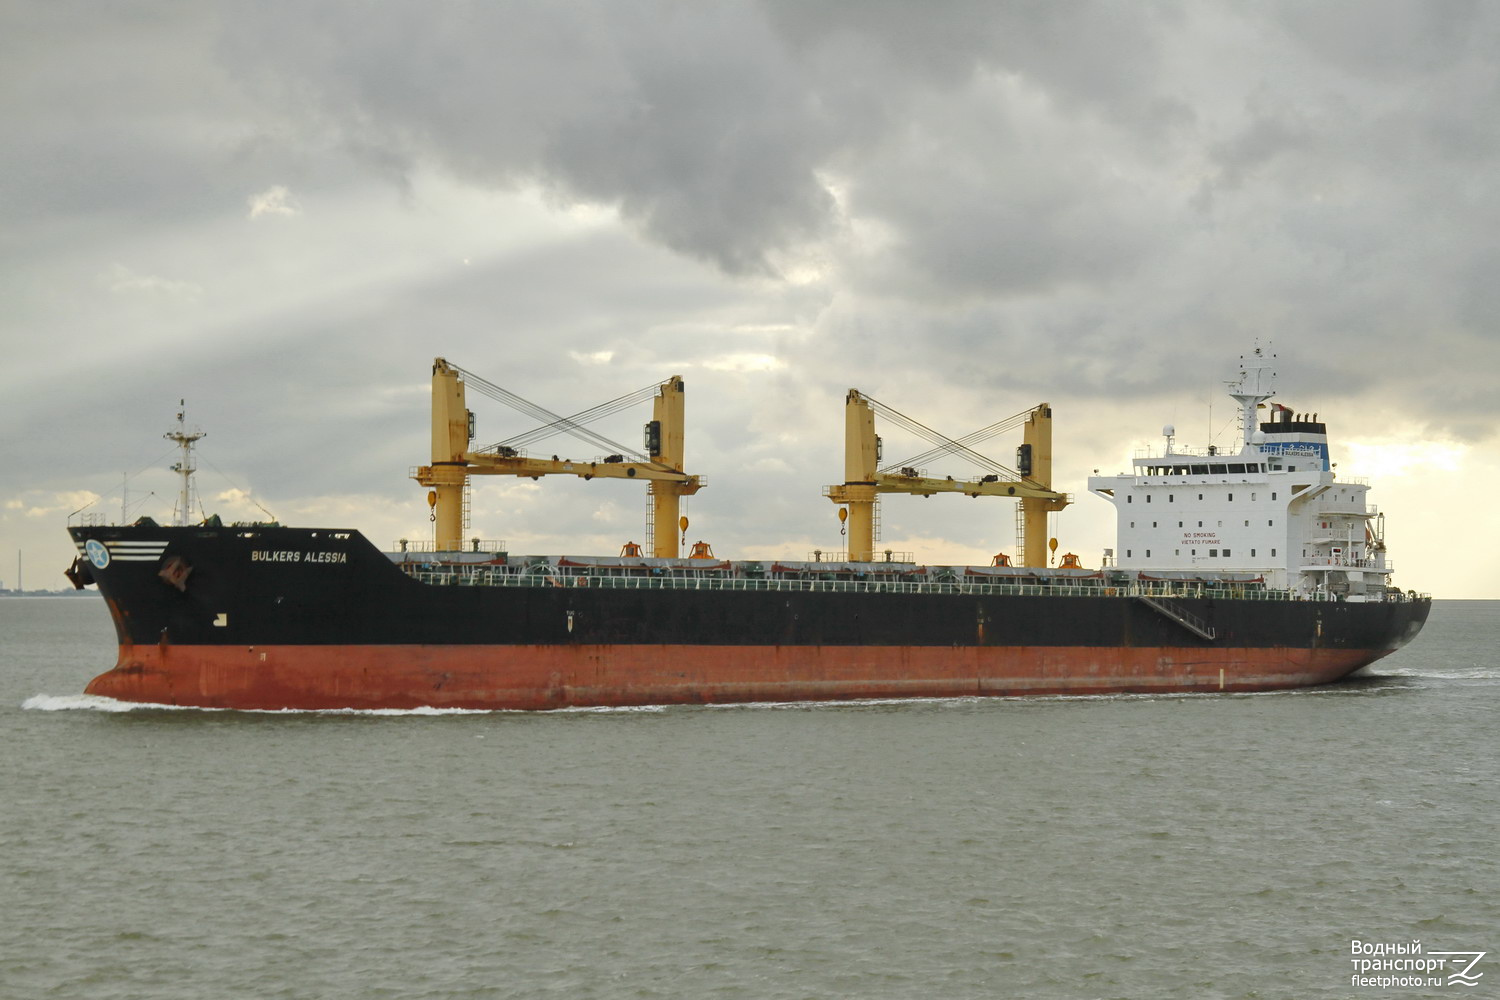 Bulkers Alessia